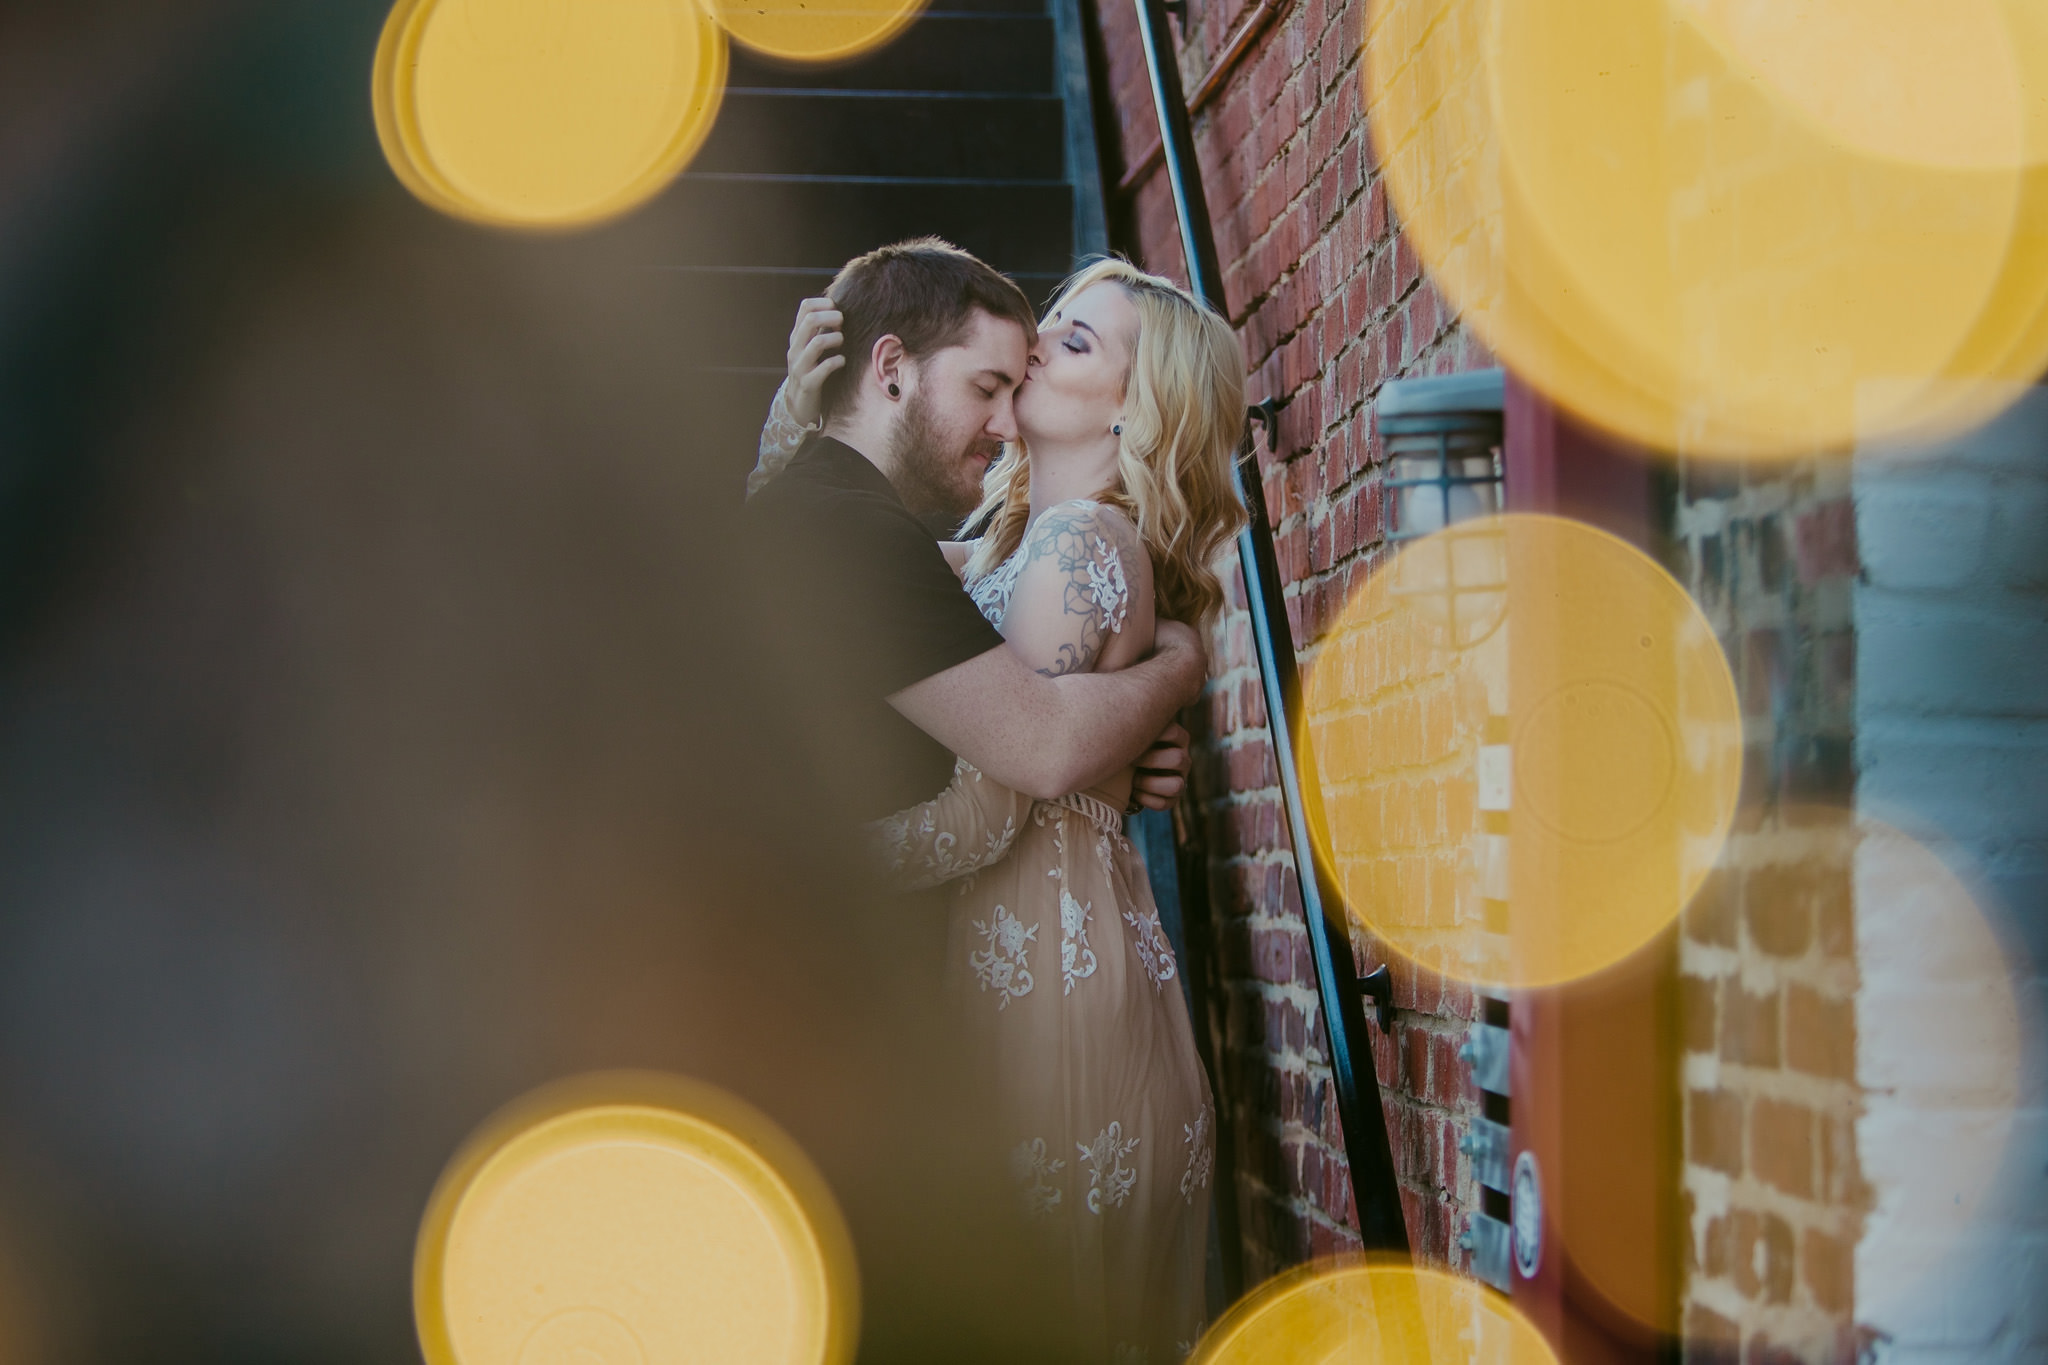 Twinkle lights surround this sweet couple on the streets of NoDa for their maternity session in Charlotte, NC